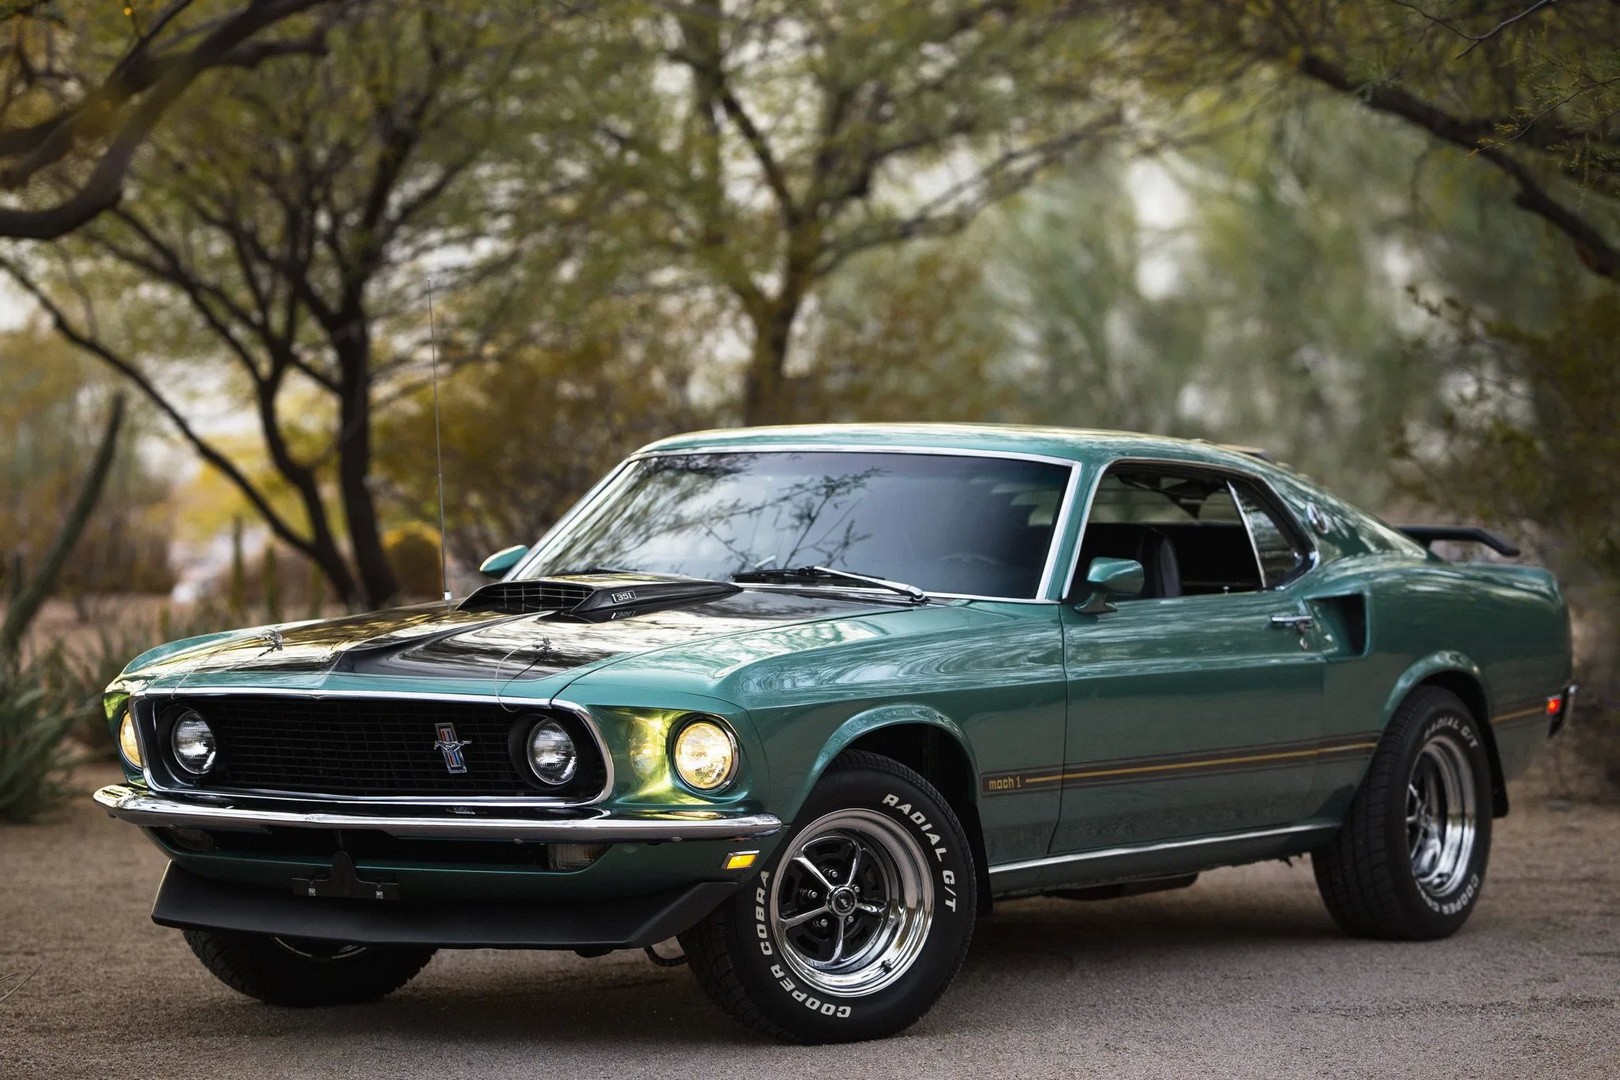 1969 Mustang Mach 1 Goes Under the Knife, Comes Out More Glorious Than ...